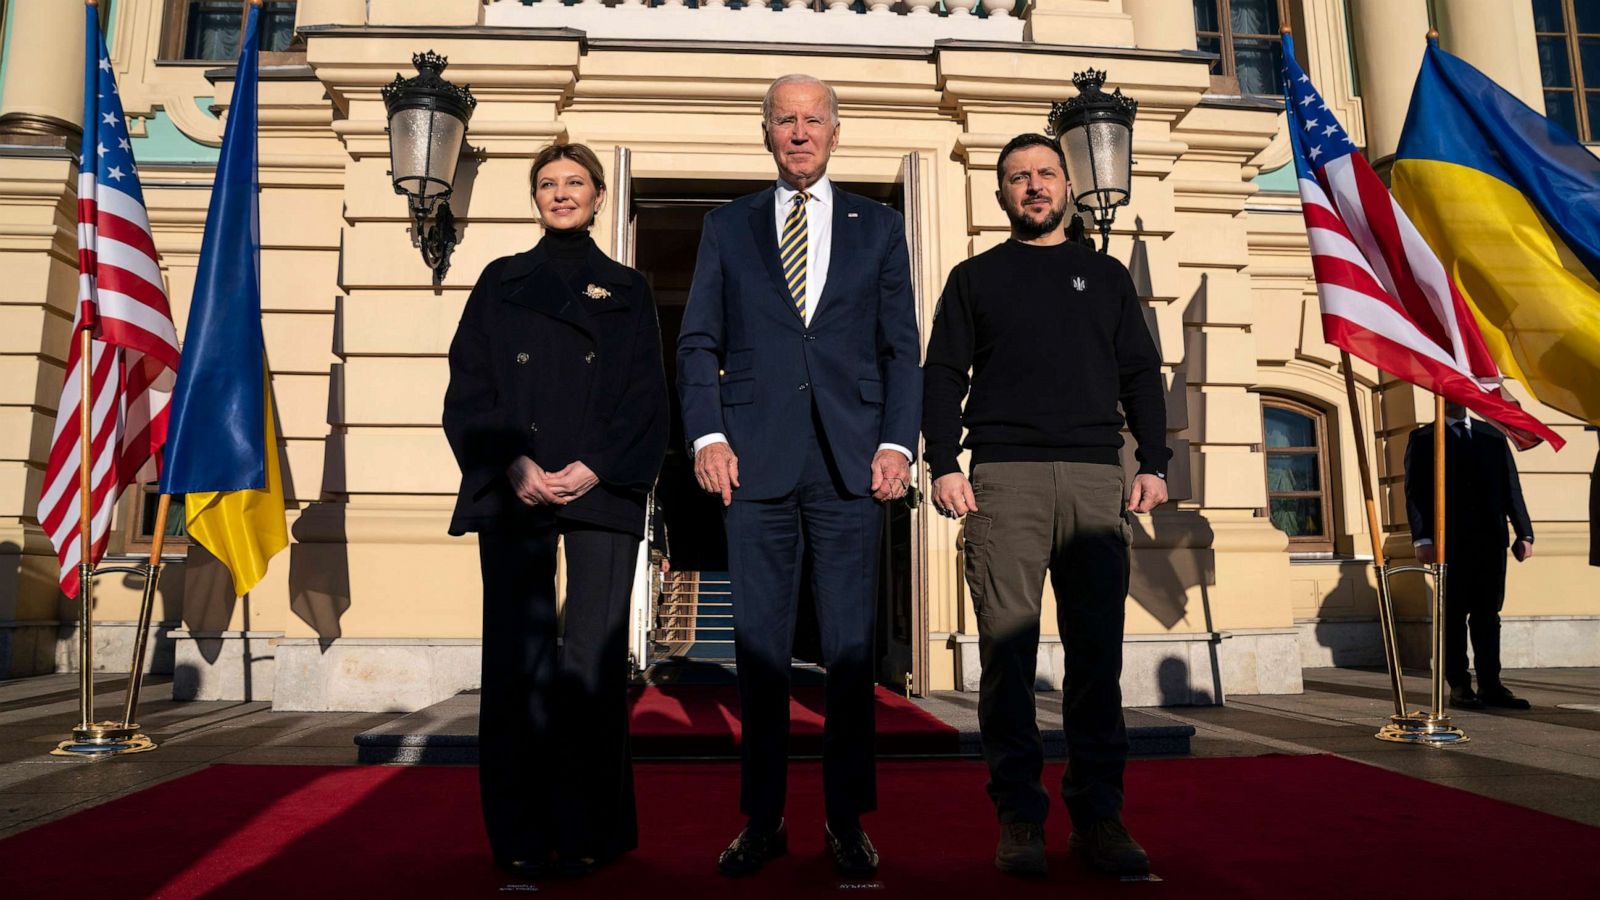 Biden makes surprise Ukraine visit, signaling strong US support in fight against Russia